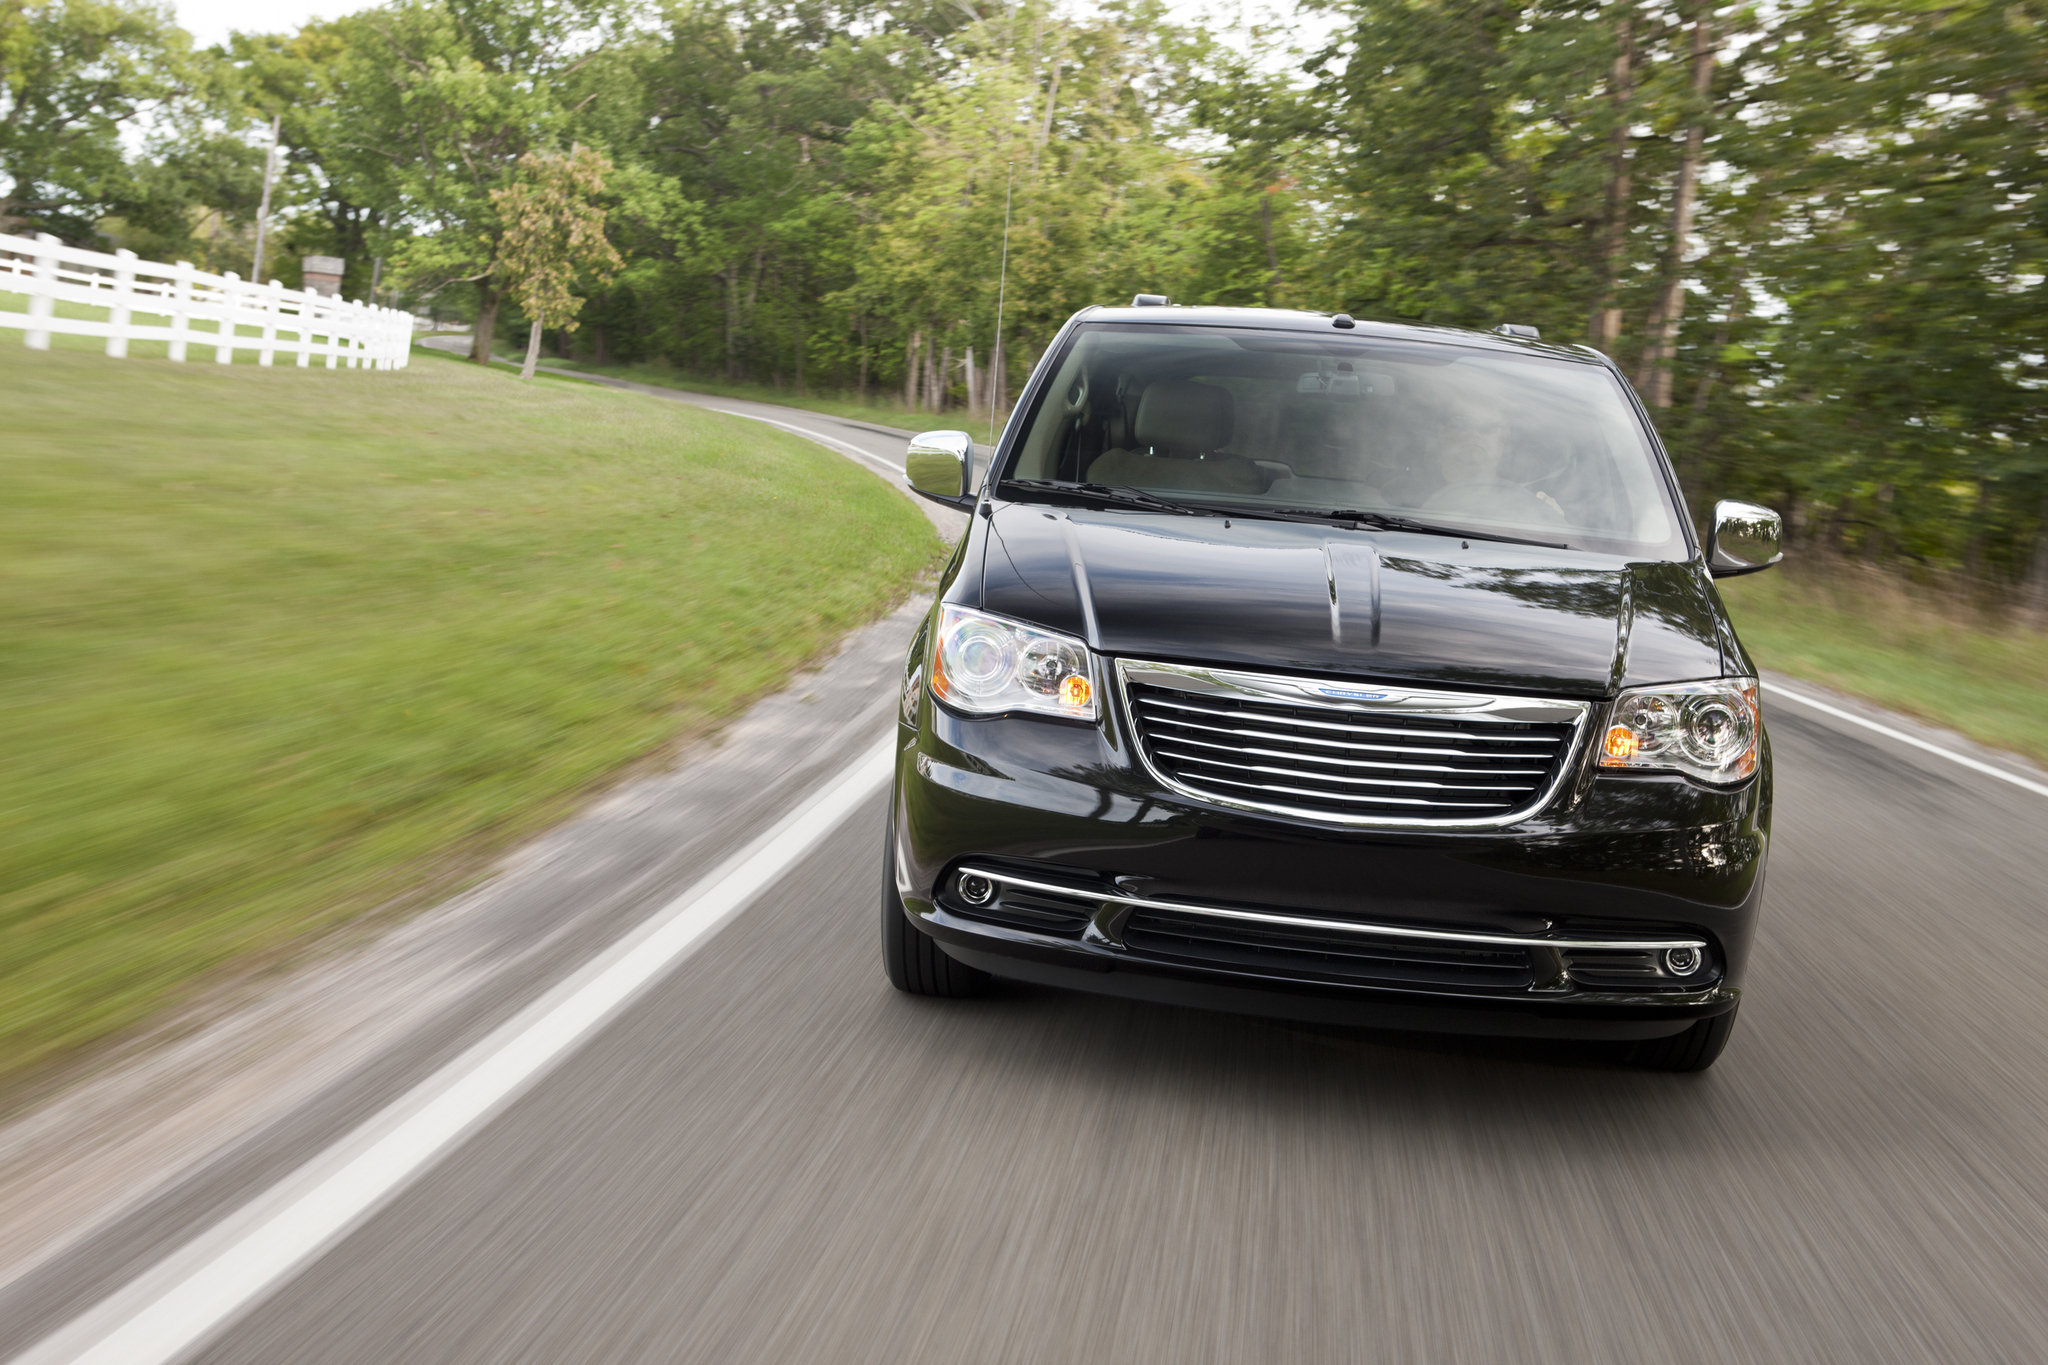 2012-chrysler-town-and-countryjpg-52ce62a05cfef6a9